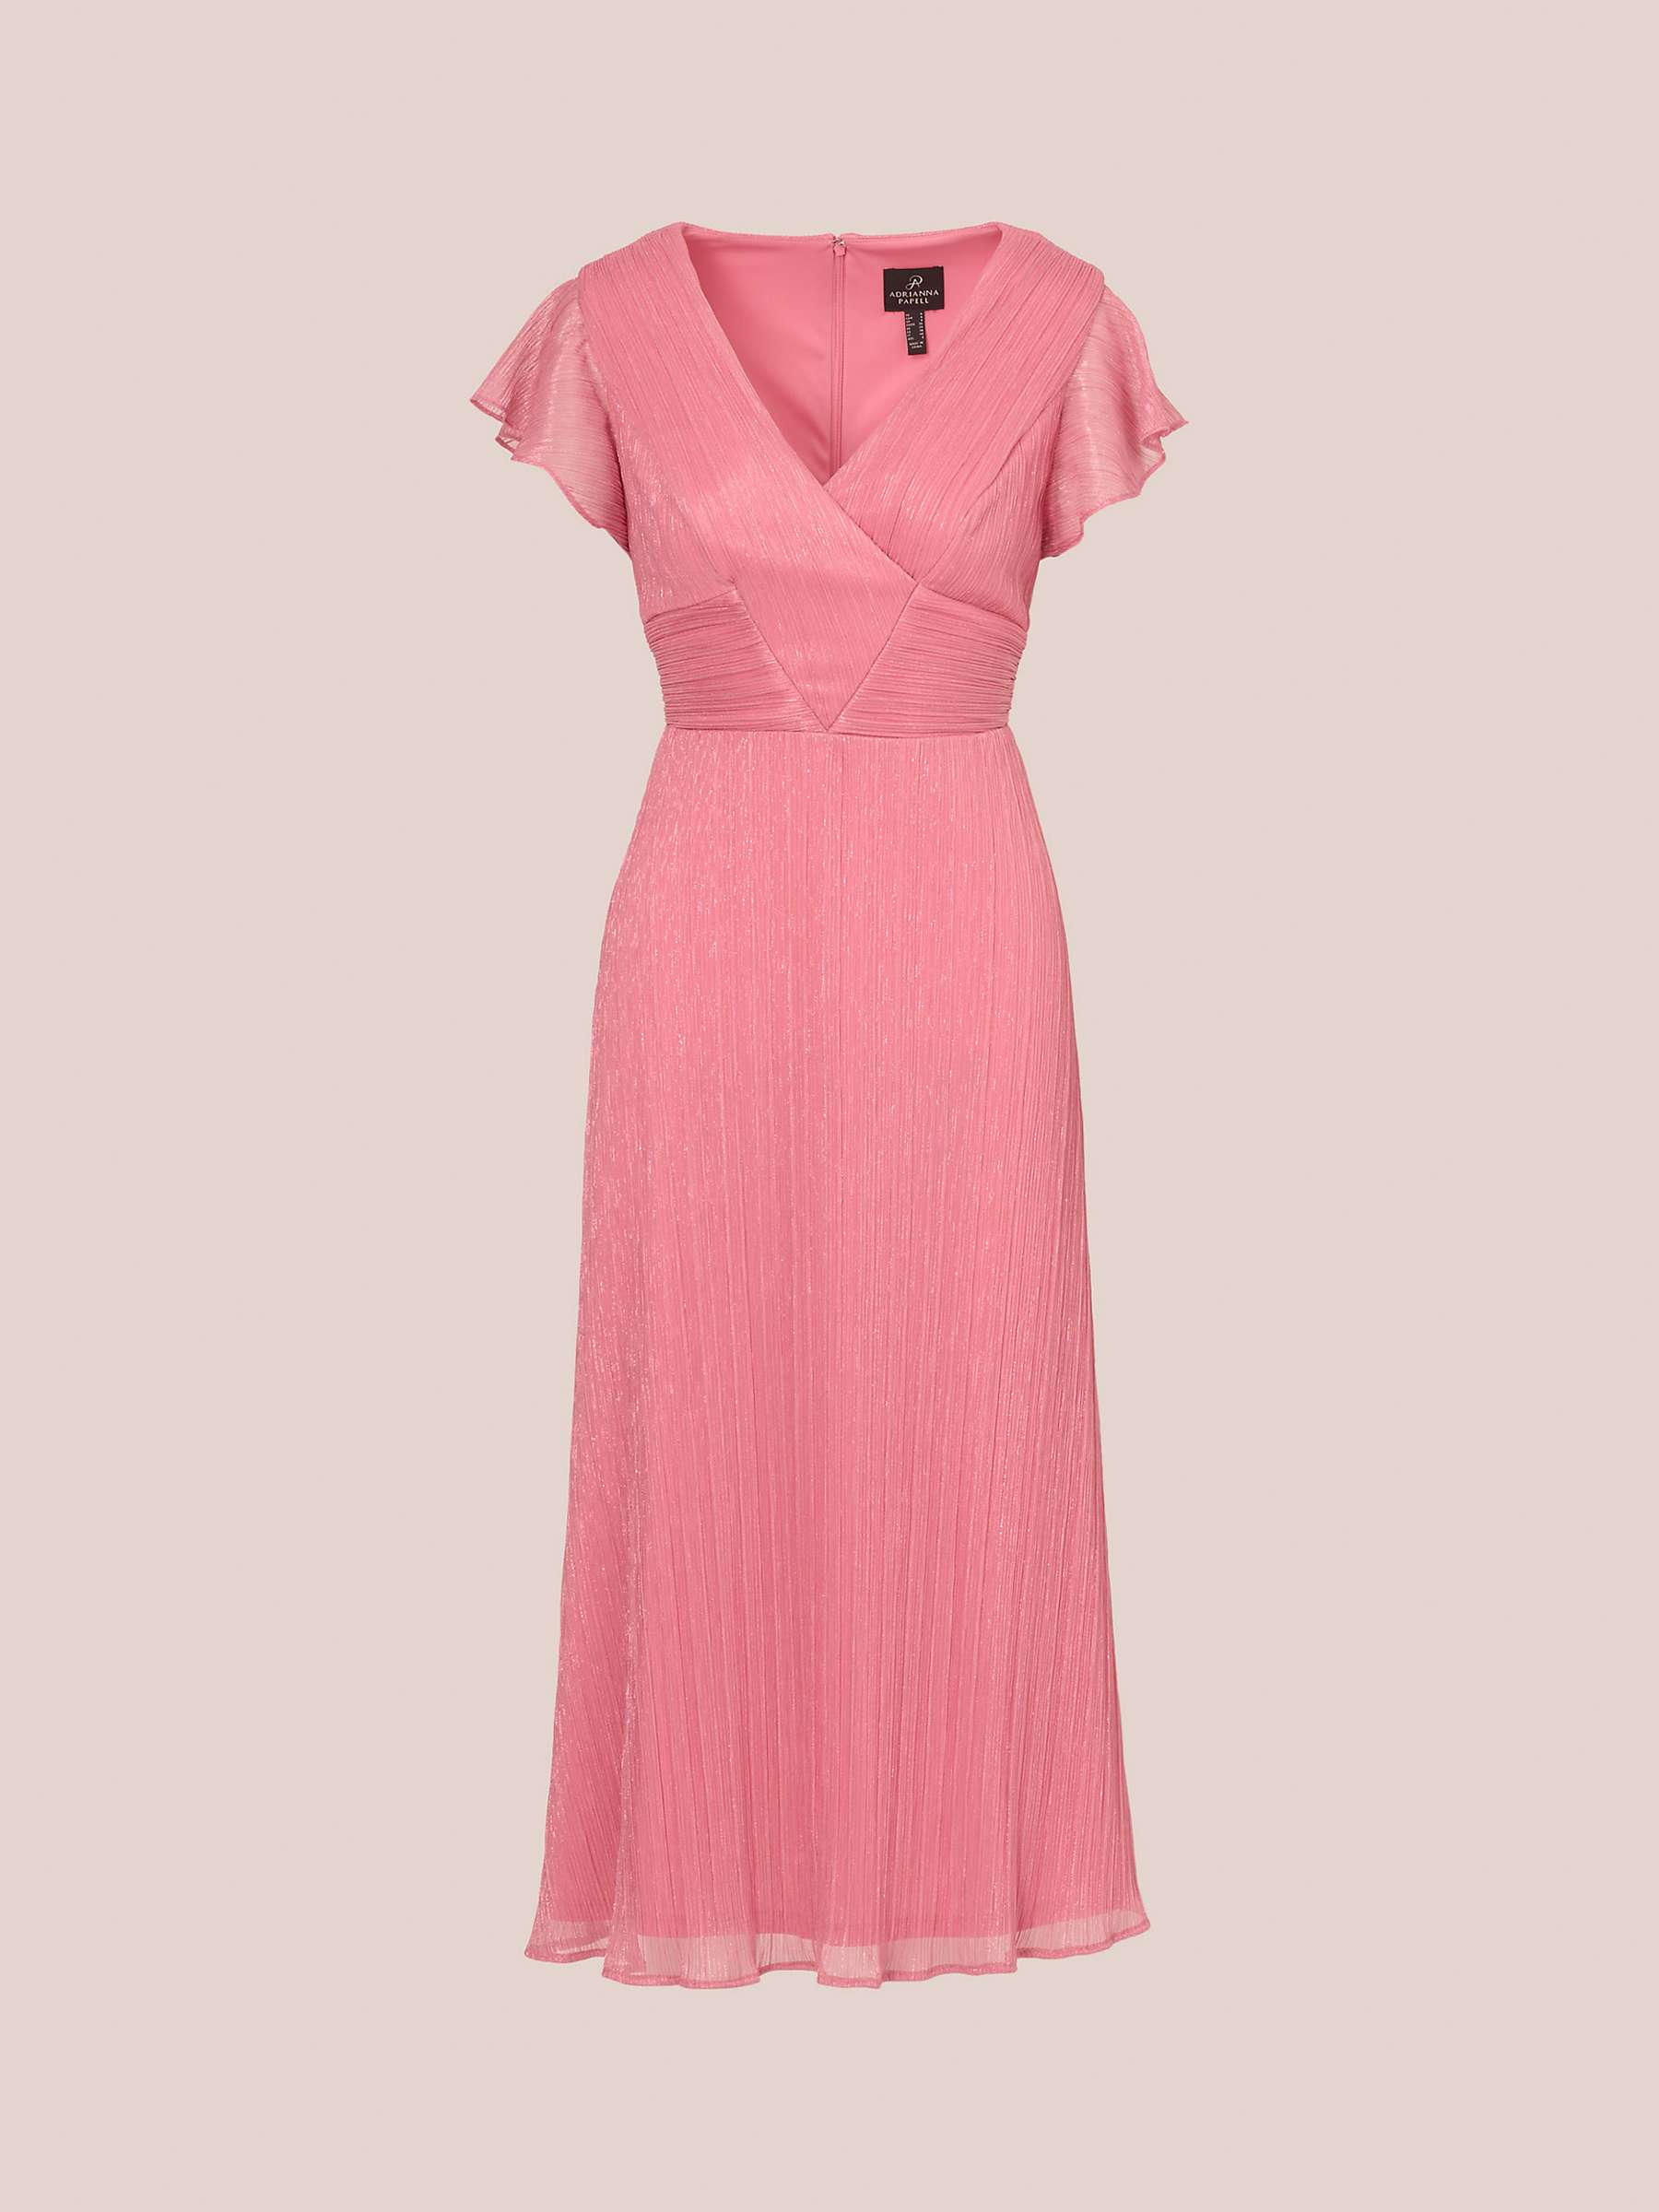 Buy Adrianna Papell Midi Crinkle Mesh Dress, Faded Rose Online at johnlewis.com